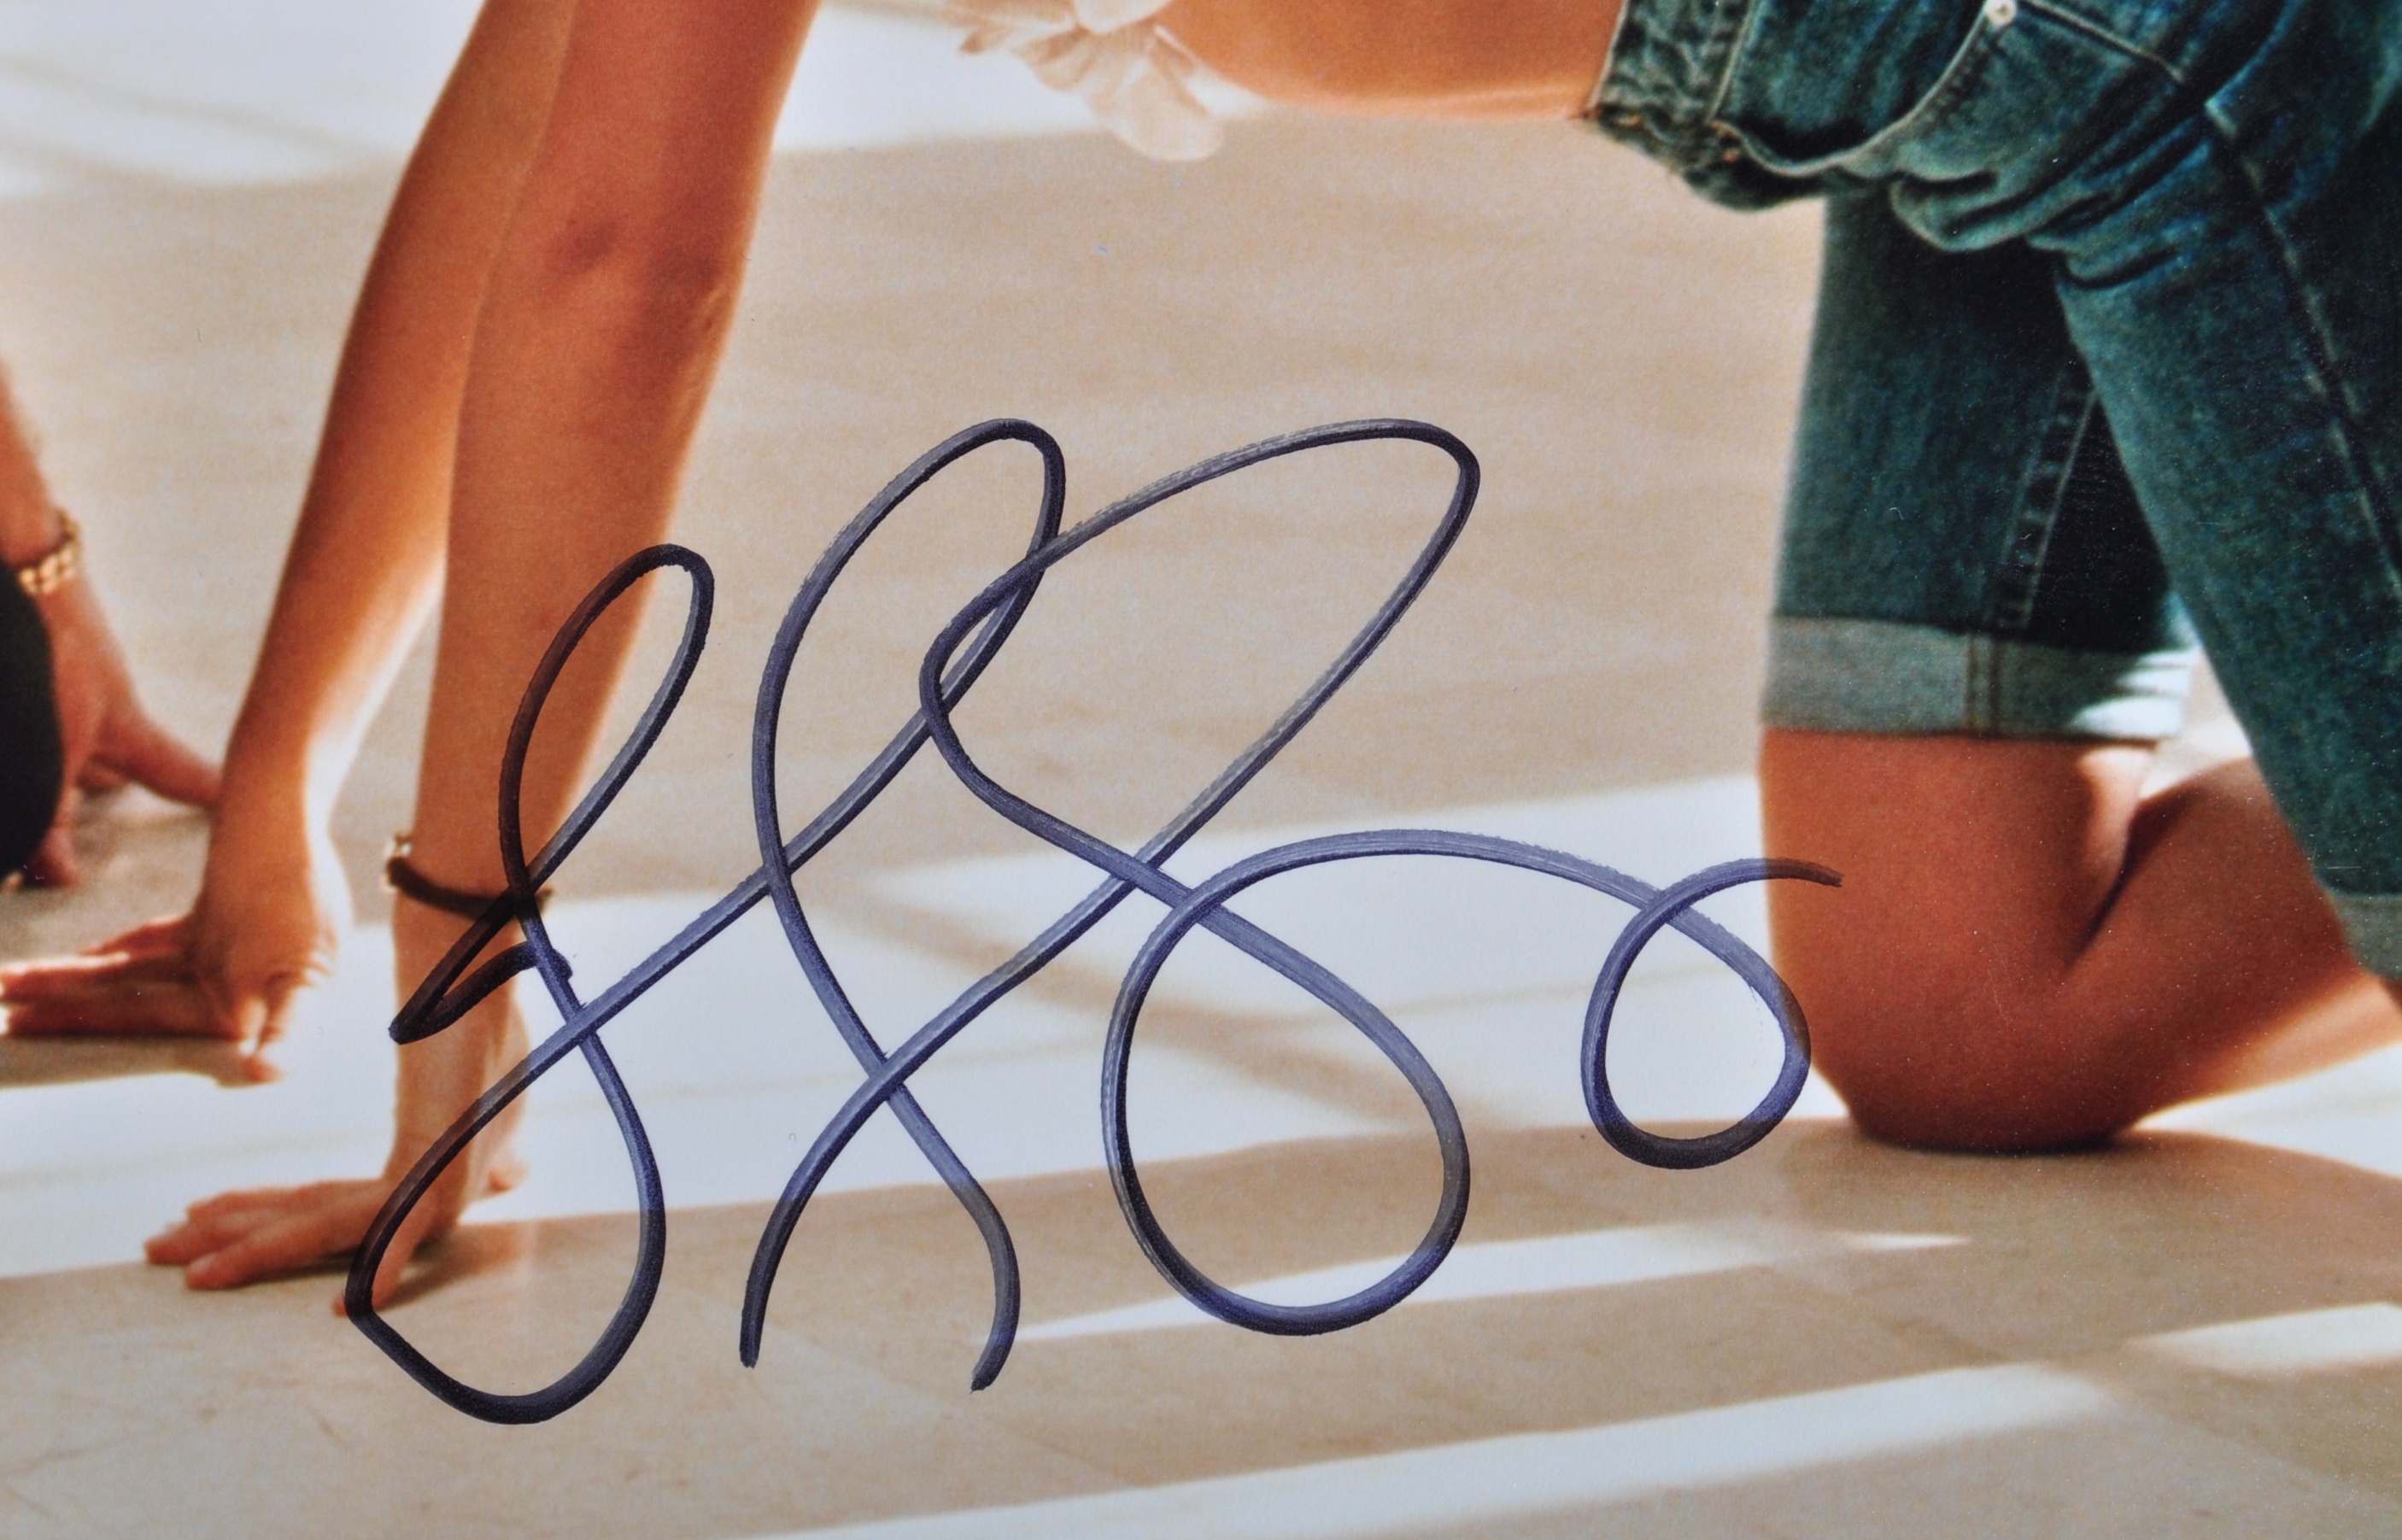 DIRTY DANCING (1987) - JENNIFER GREY - AUTOGRAPHED PHOTO - Image 2 of 2